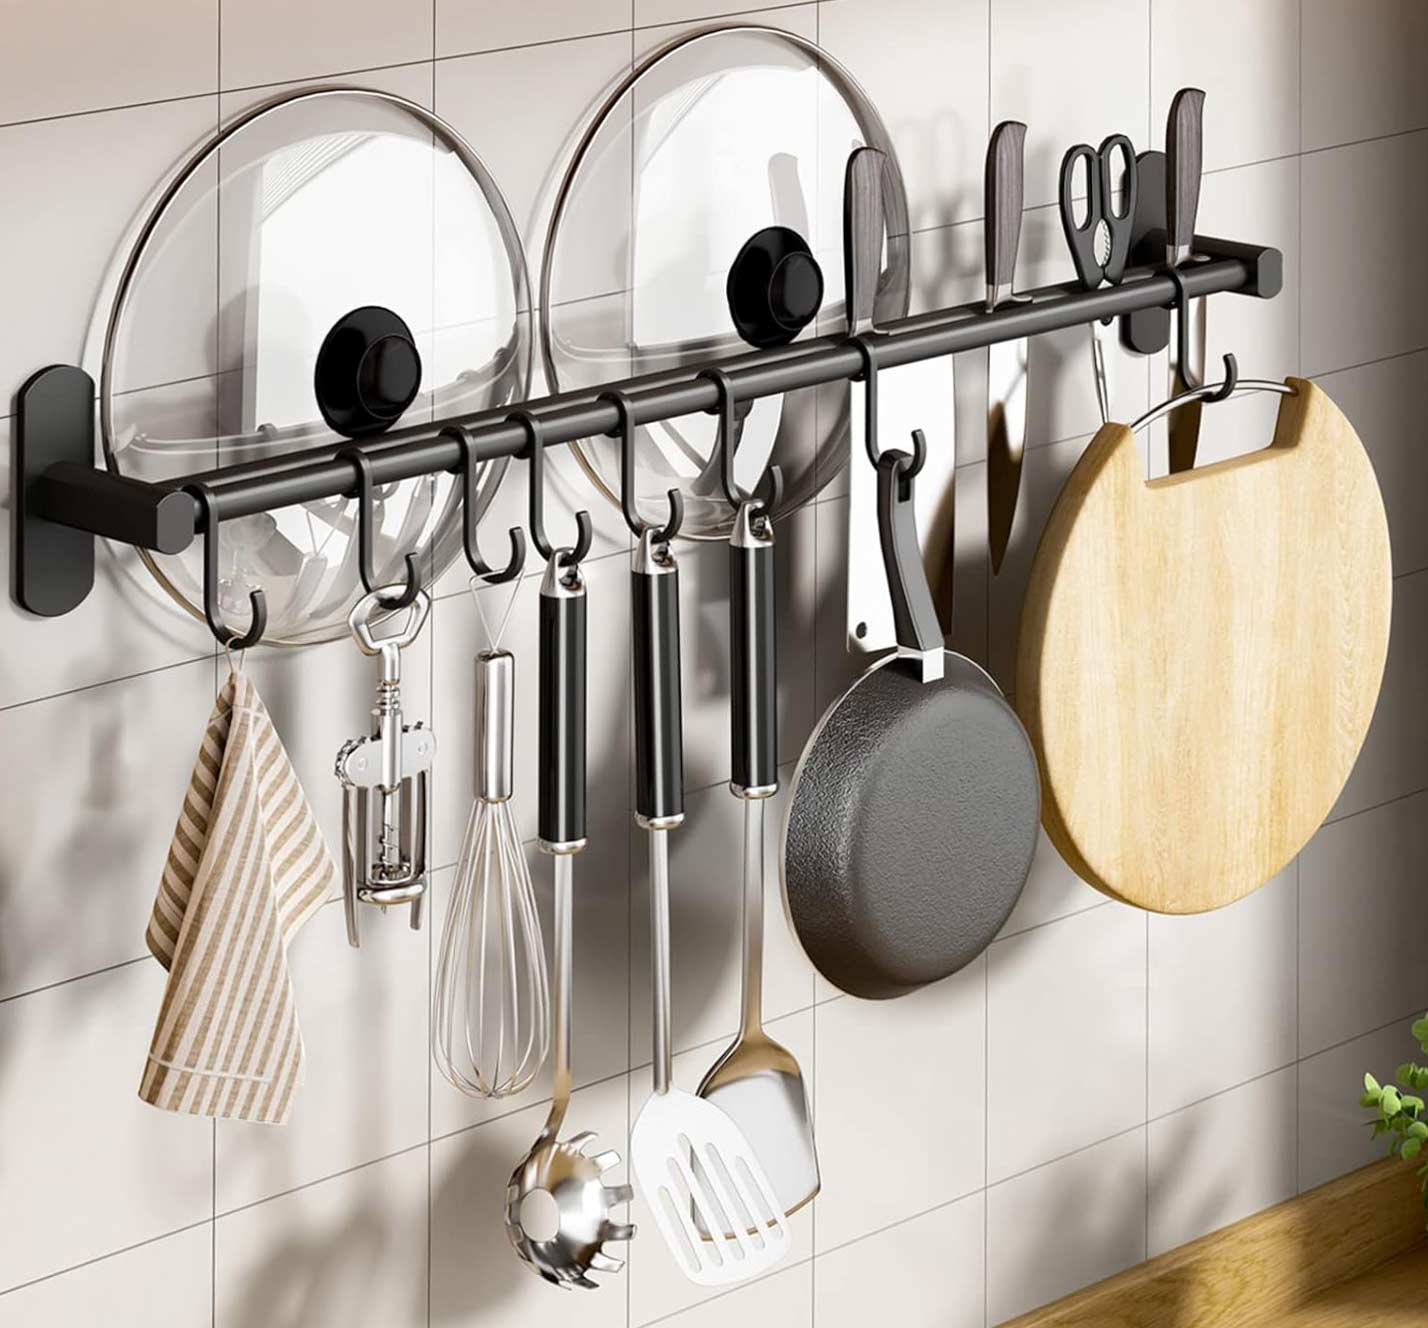 Kitchen organizer on the wall with many cooking tools hung